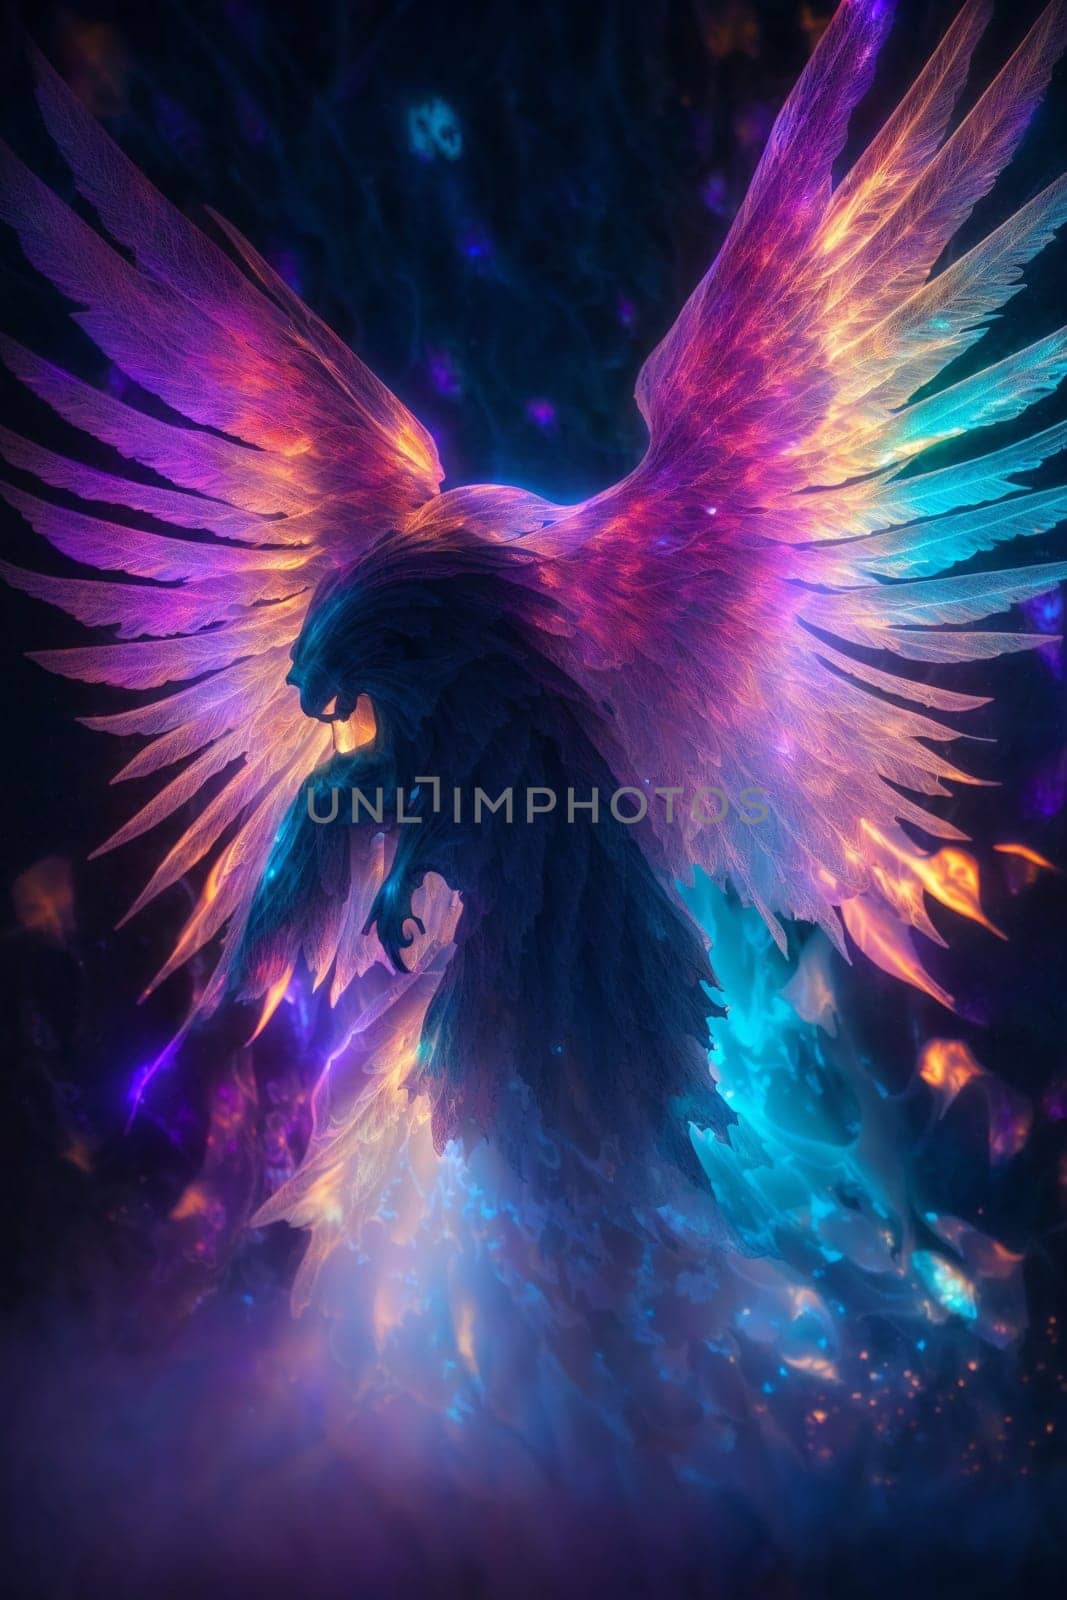 A vibrant bird with strikingly colored wings soars gracefully through an open expanse.